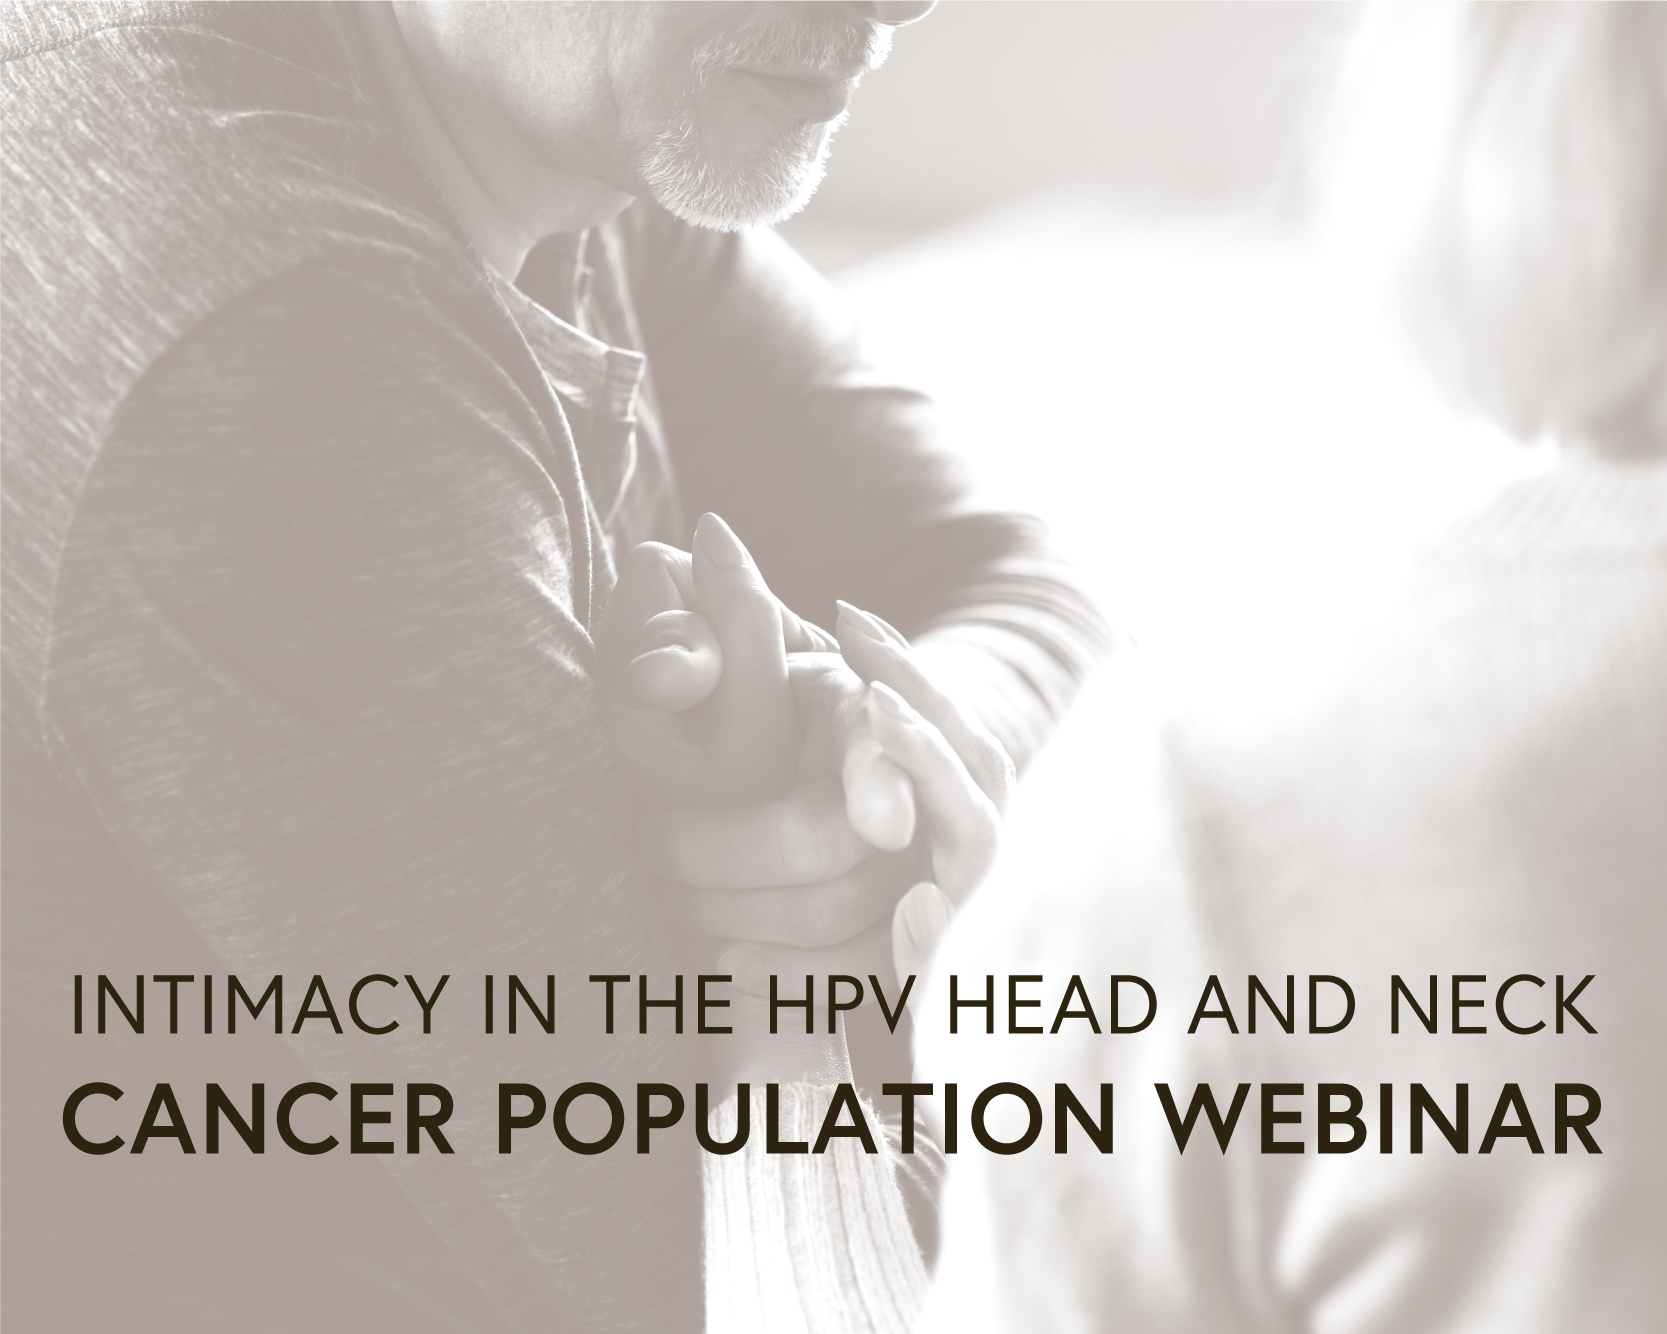 Intimacy in the Head and Neck Cancer Population Webinar